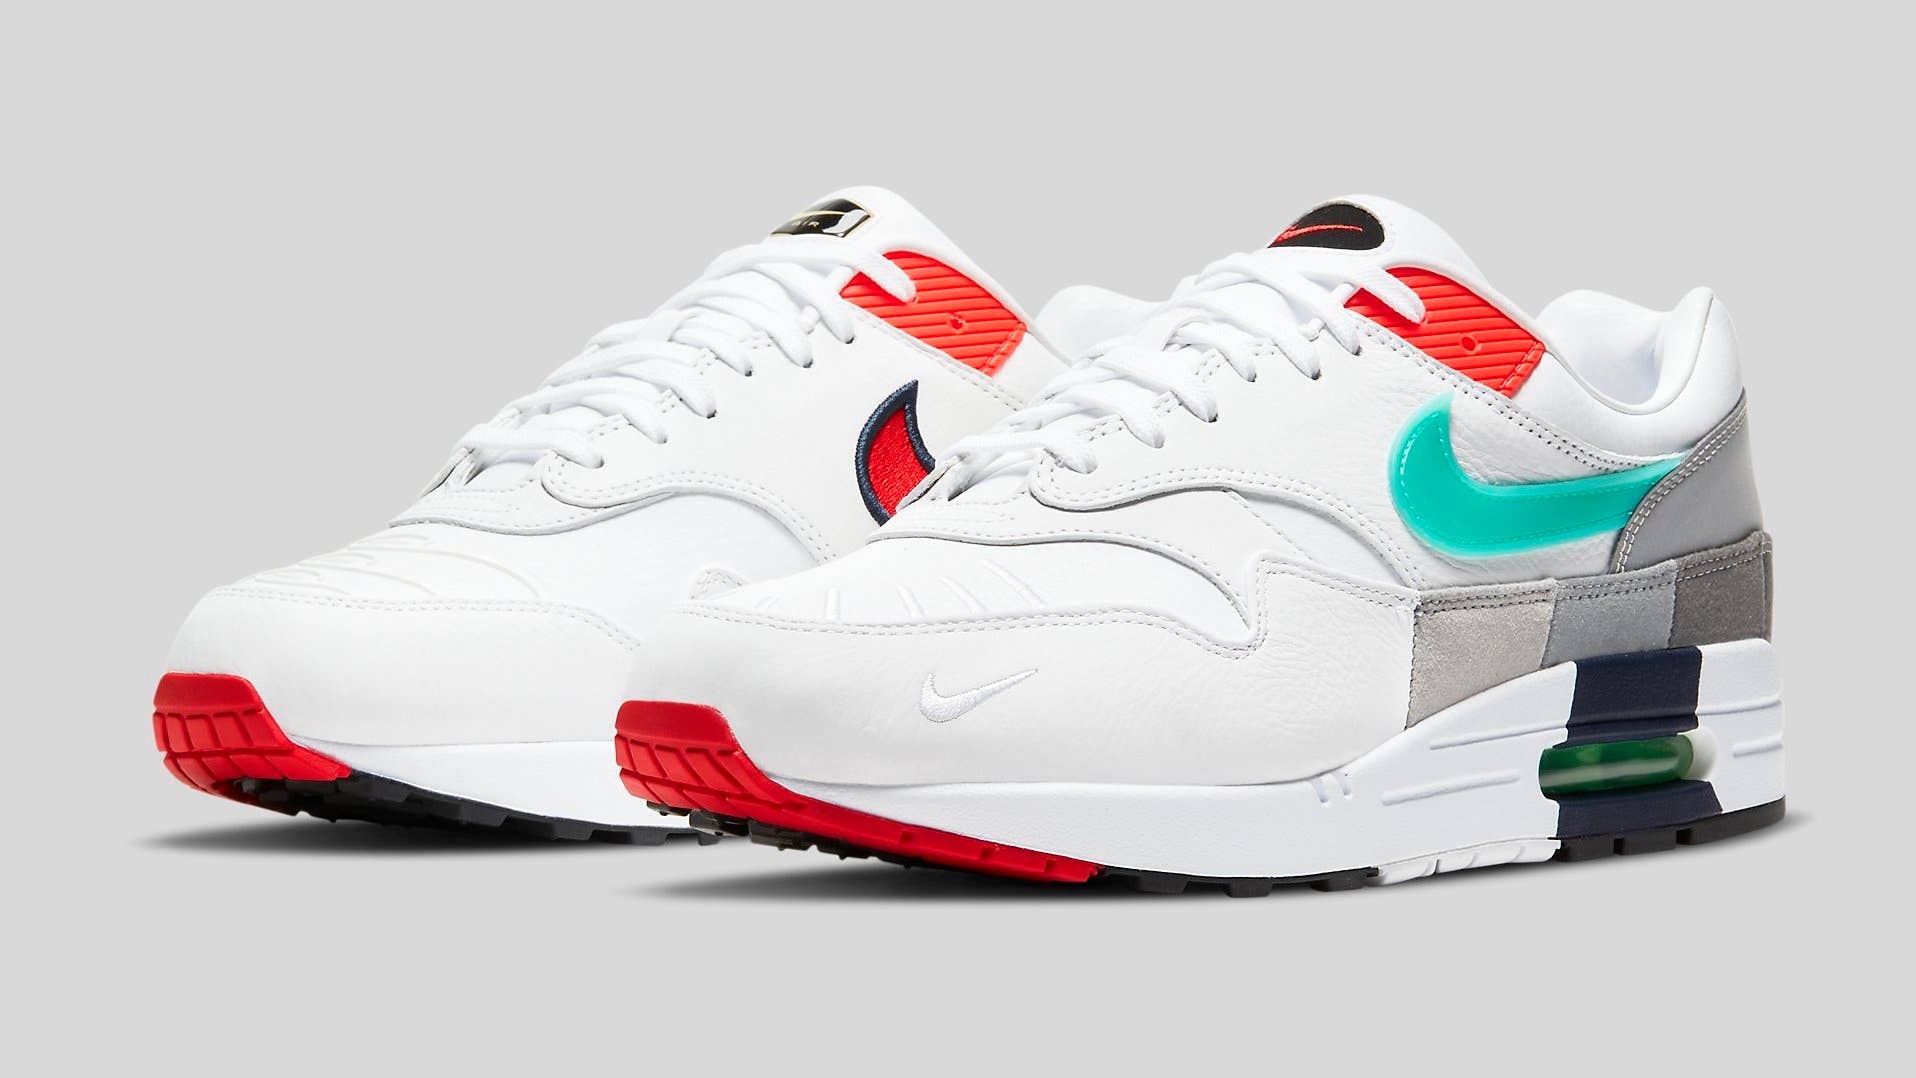 Nike Air Max 1 'Evolutions of Icons' CW6541 100 Pair